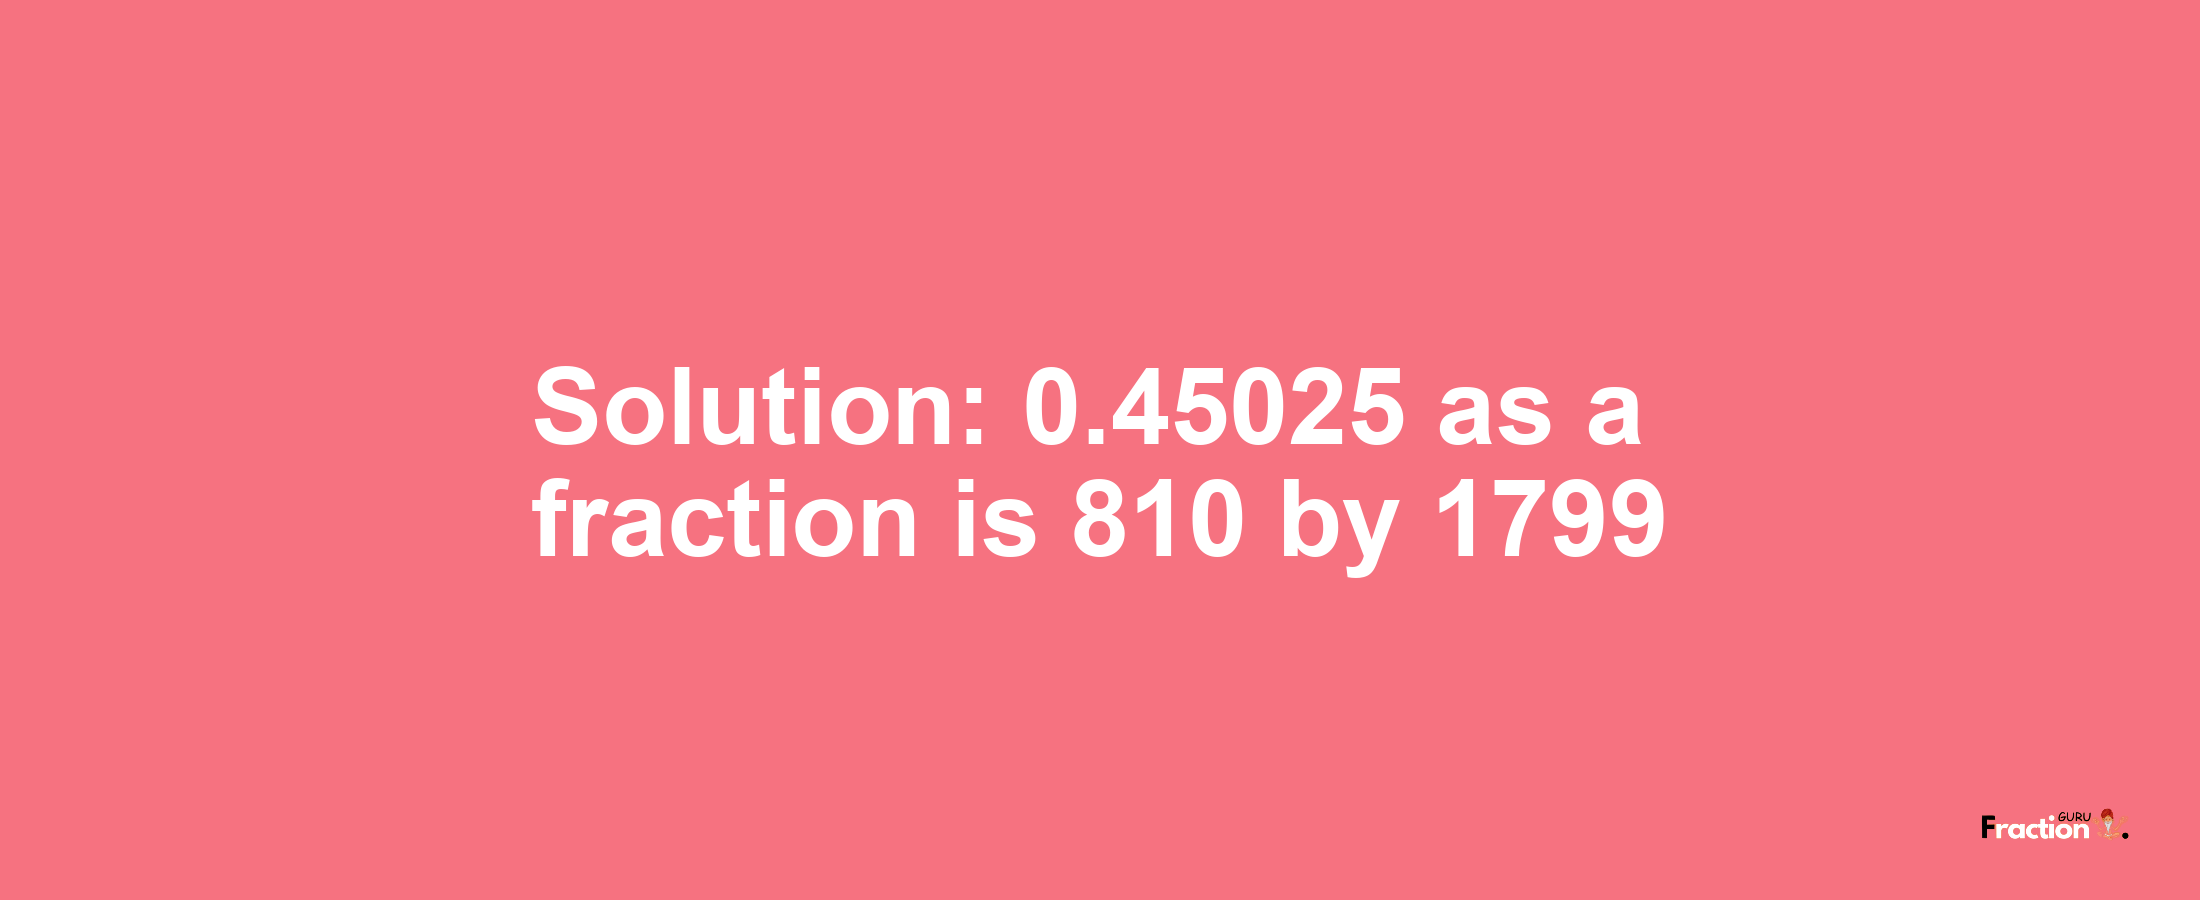 Solution:0.45025 as a fraction is 810/1799